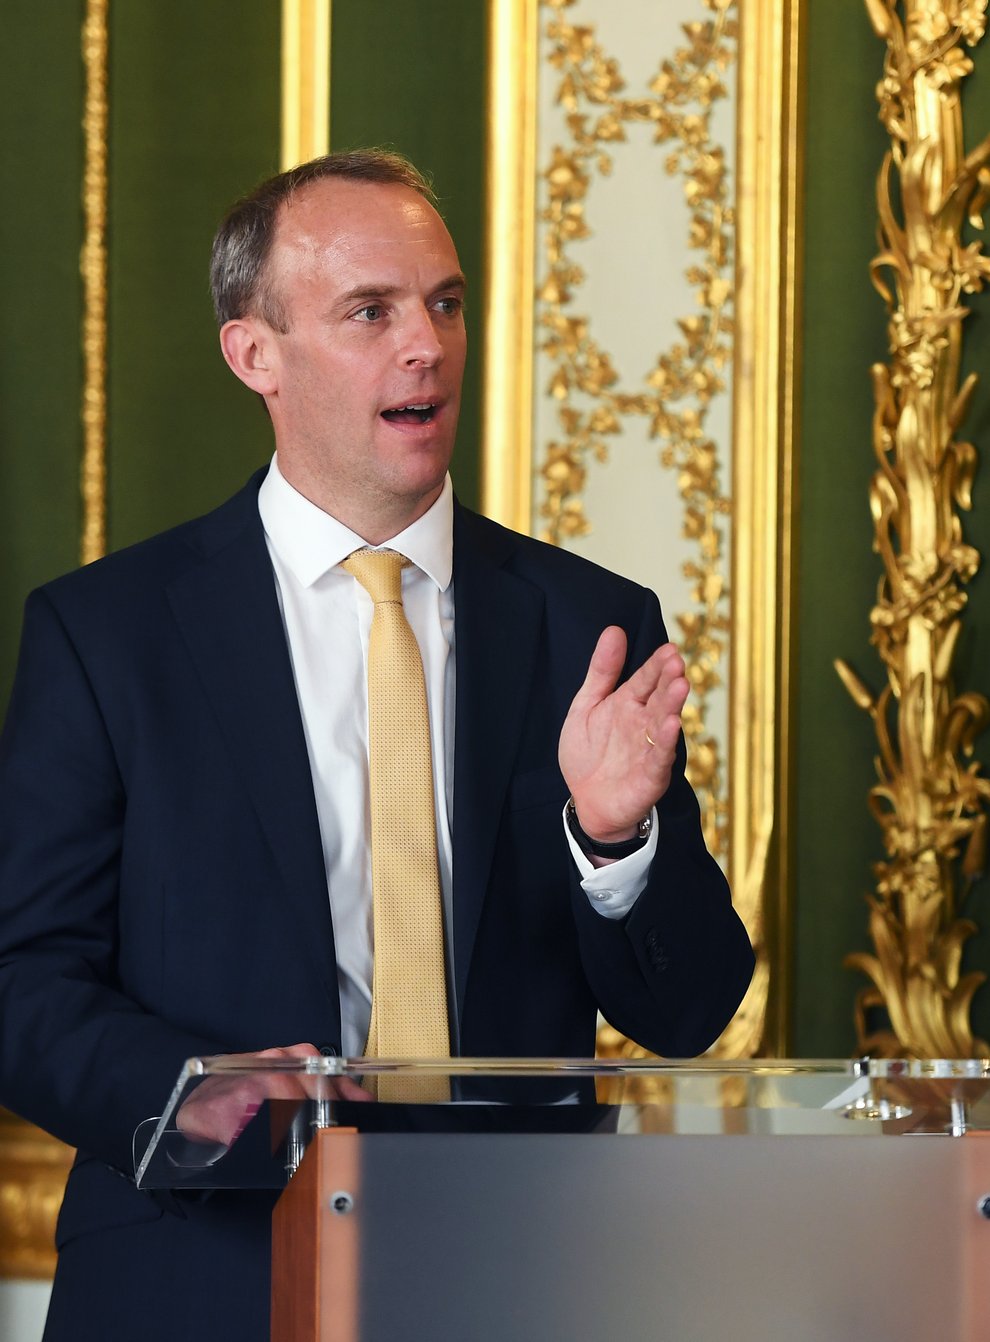 Foreign Secretary Dominic Raab said most countries were trading with China as he defended the UK's changing foreign policy direction (Peter Summers/PA)